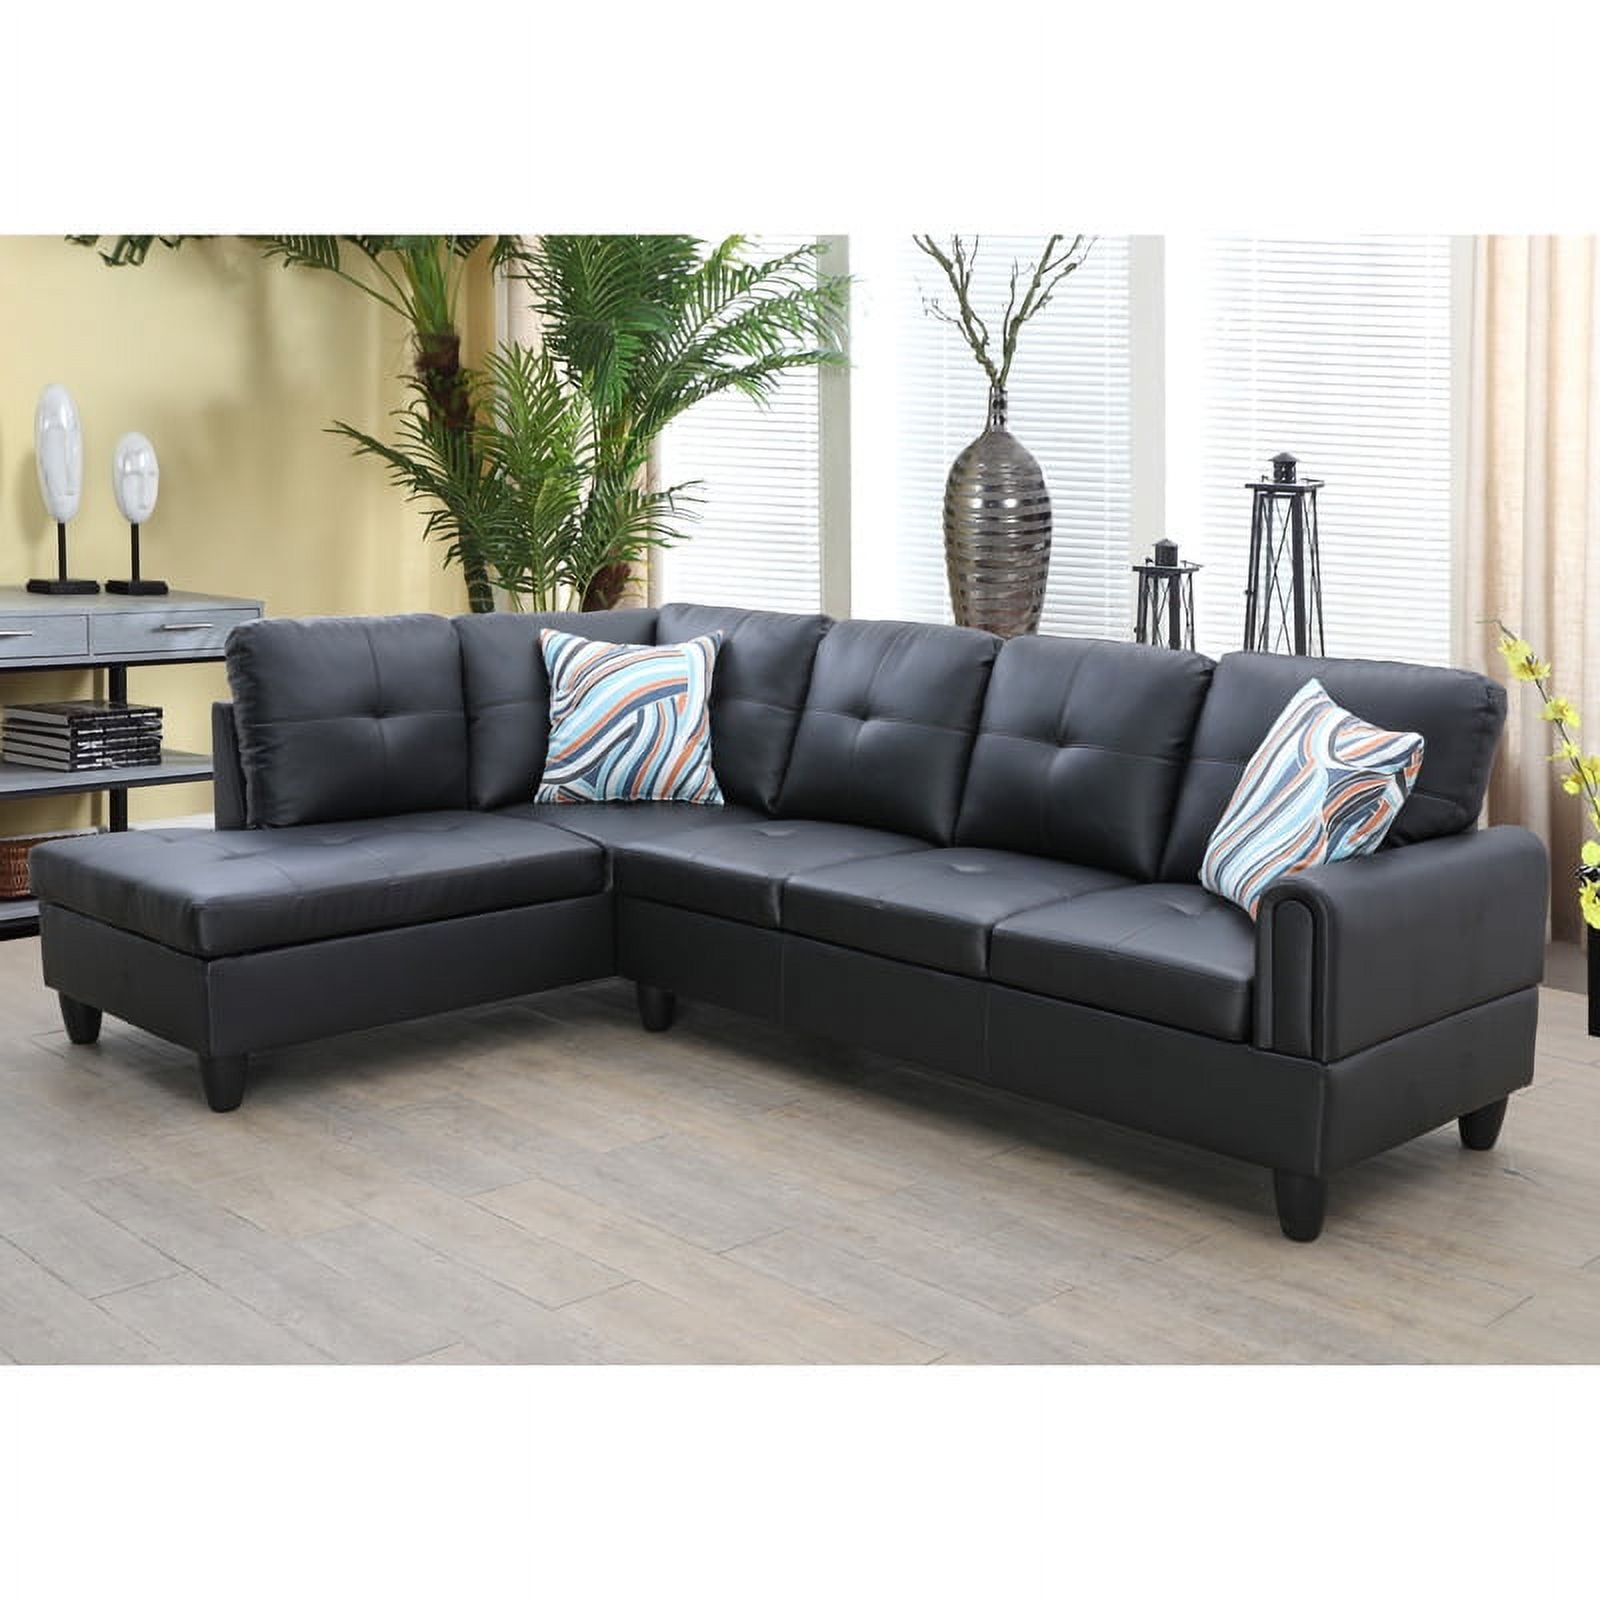 Hommoo Faux Leather 3 Piece Couch Living Room Sofa Set, L Shaped Couch For  Small Space, Black(without Ottoman) – Walmart With Regard To 3 Piece Leather Sectional Sofa Sets (Photo 14 of 15)